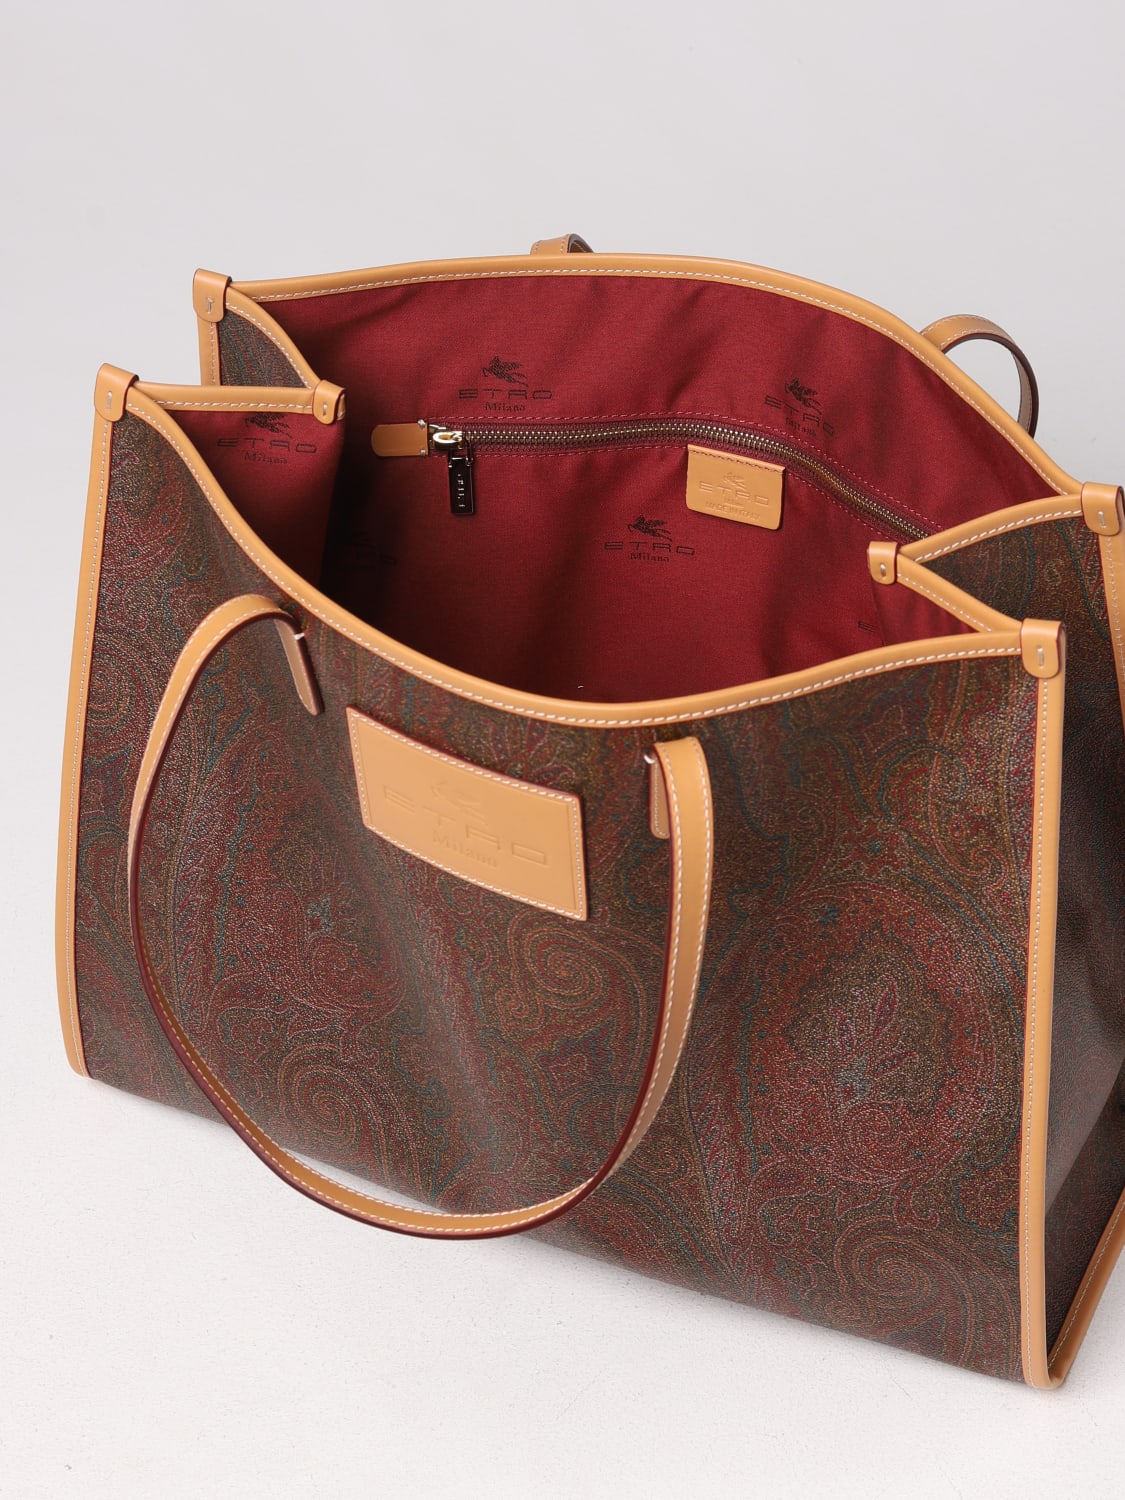 Etro Multicolor Paisley Coated Canvas and Leather Shoulder Bag Etro